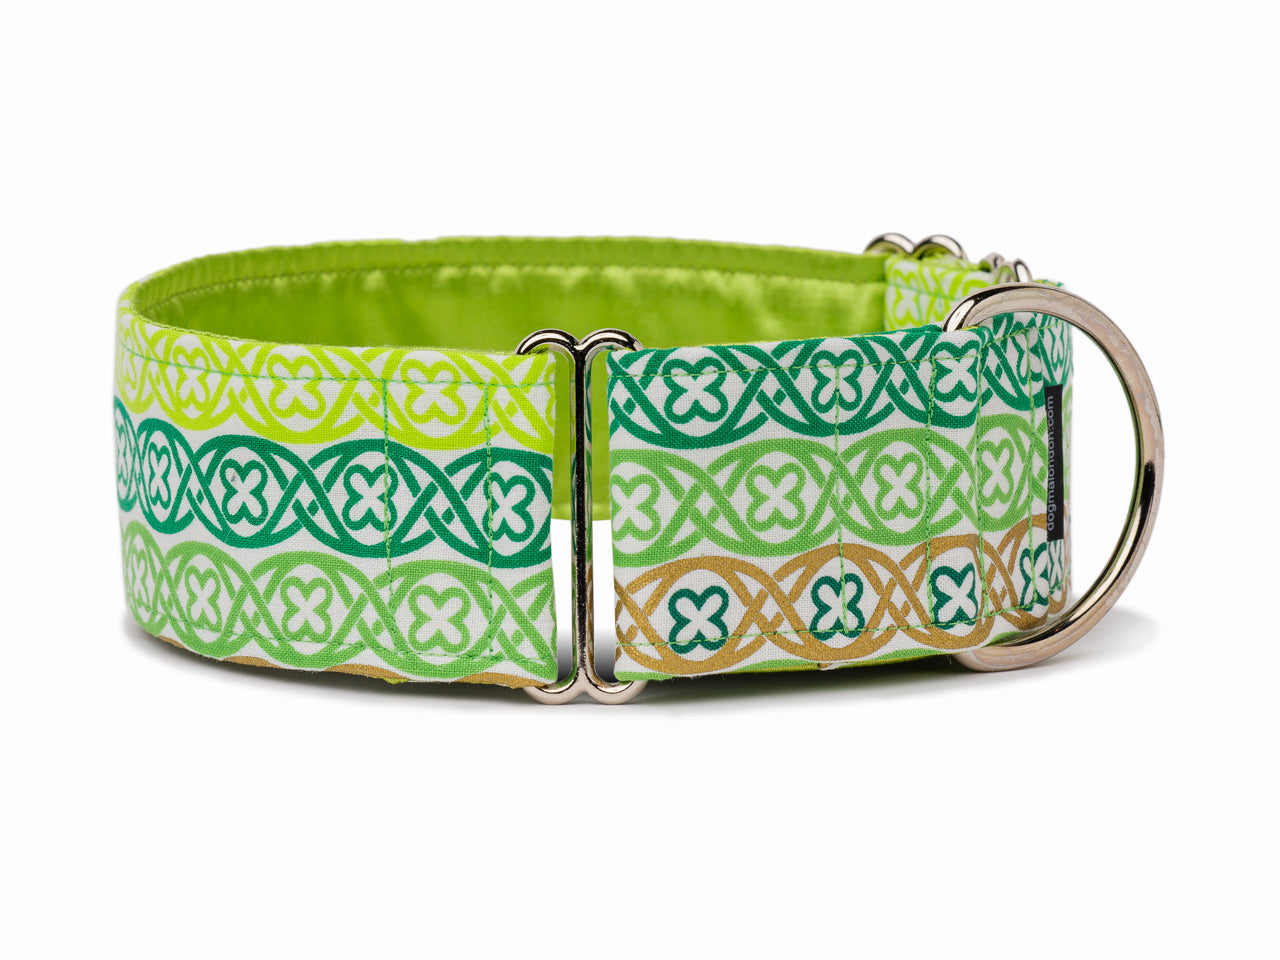 Pretty Celtic-inspired designs in shades of green and sparkly gold give any pup a bit of Irish flair!